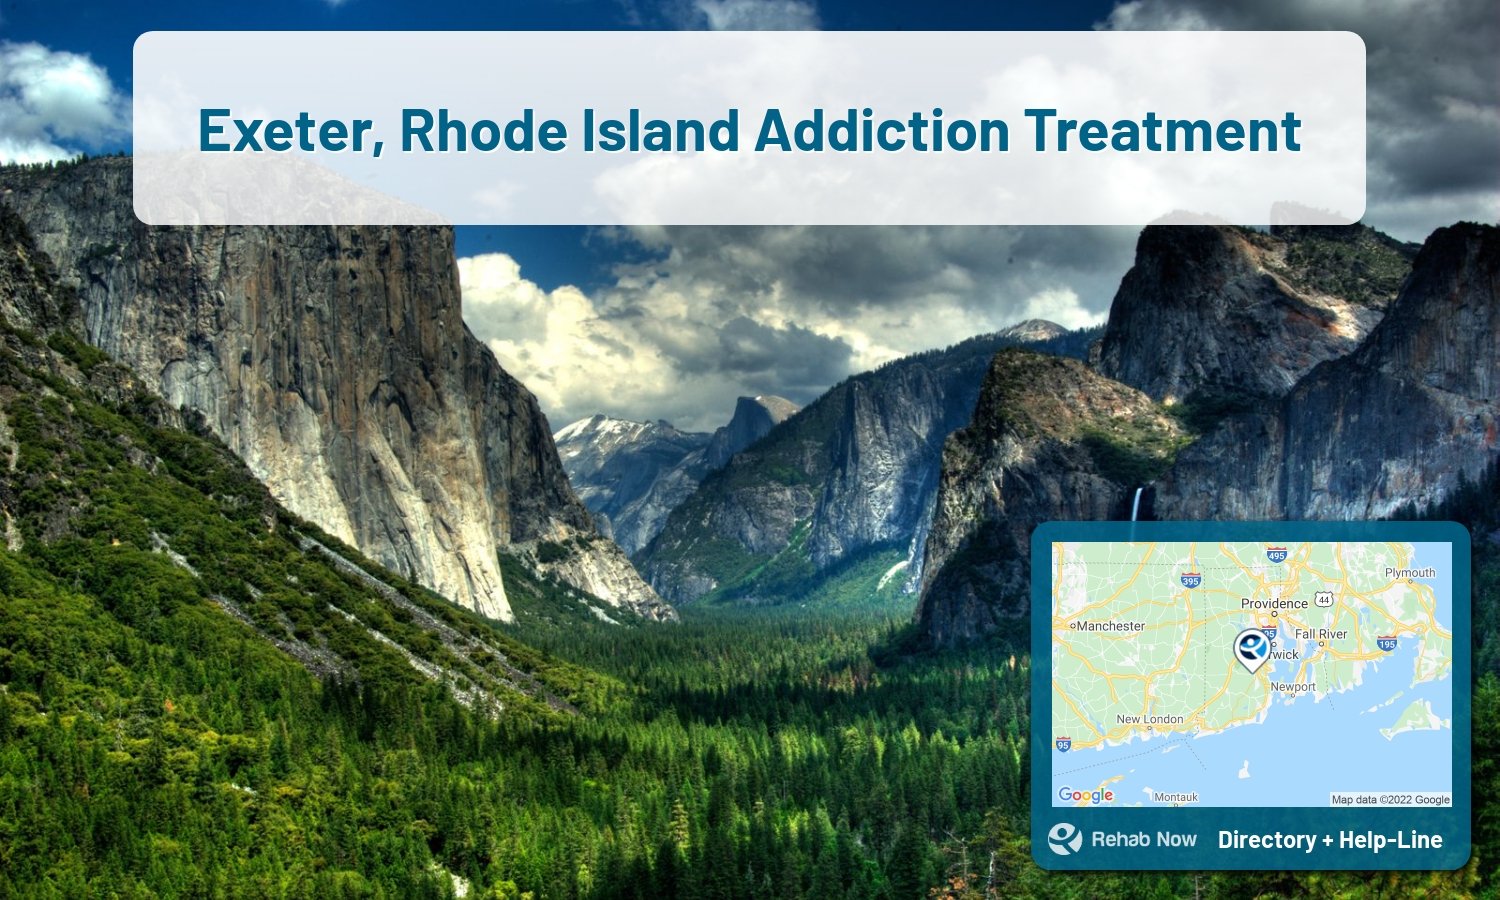 Need treatment nearby in Exeter, Rhode Island? Choose a drug/alcohol rehab center from our list, or call our hotline now for free help.